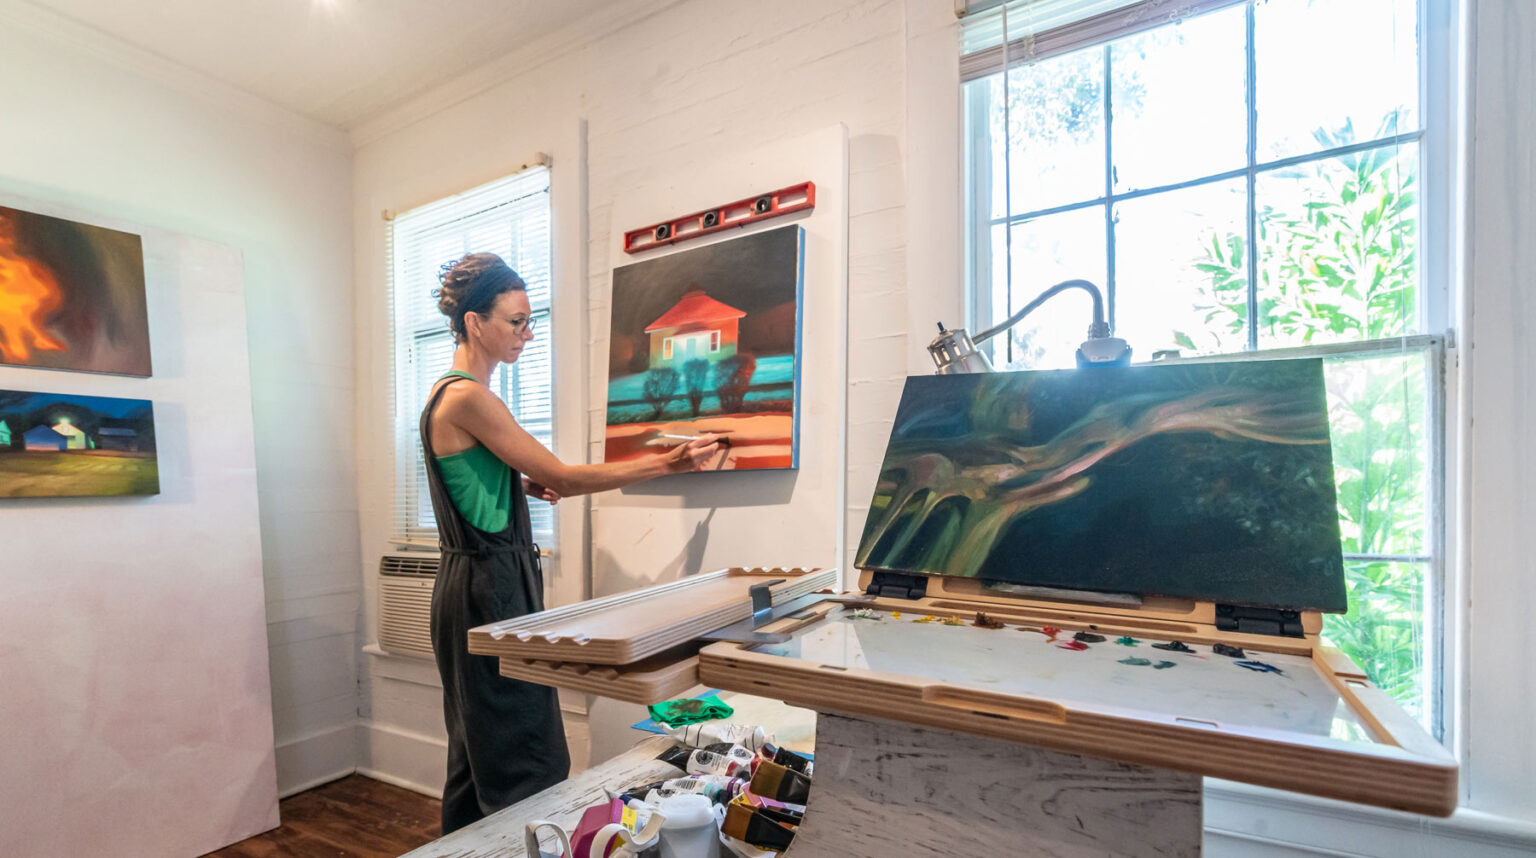 The Studios of Key West offers a residency program for emerging and established artists and writers. Due: May 15.